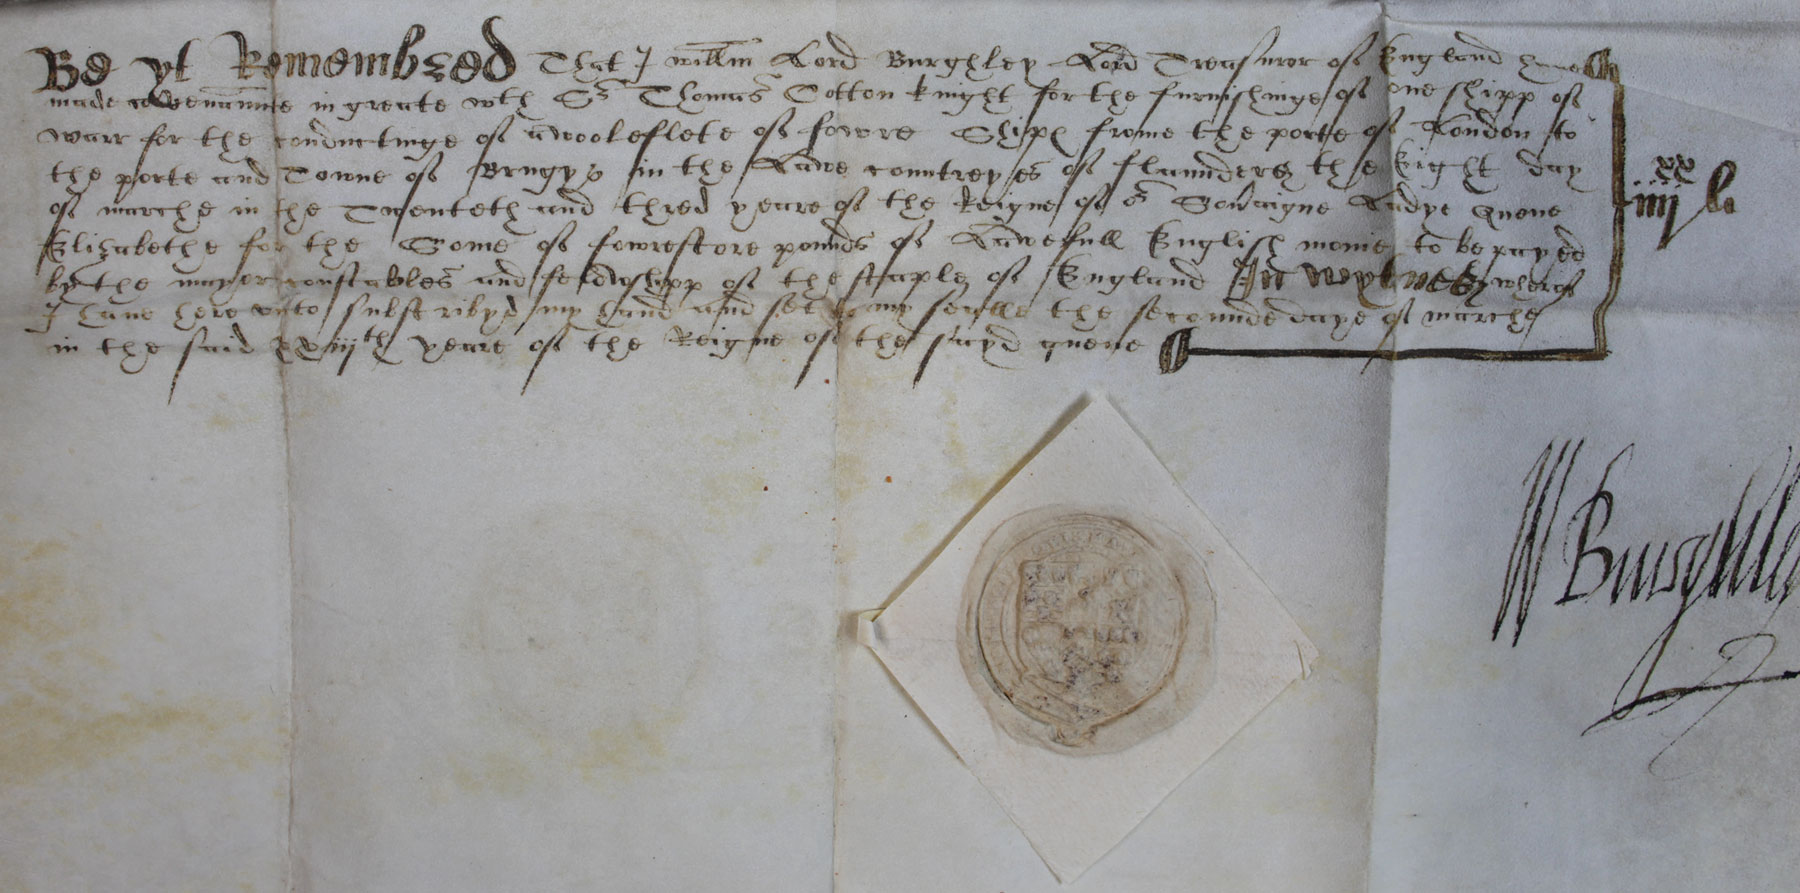 Proclamation by Lord Burghley, 2 March 1581 (E 101/668 f.48)